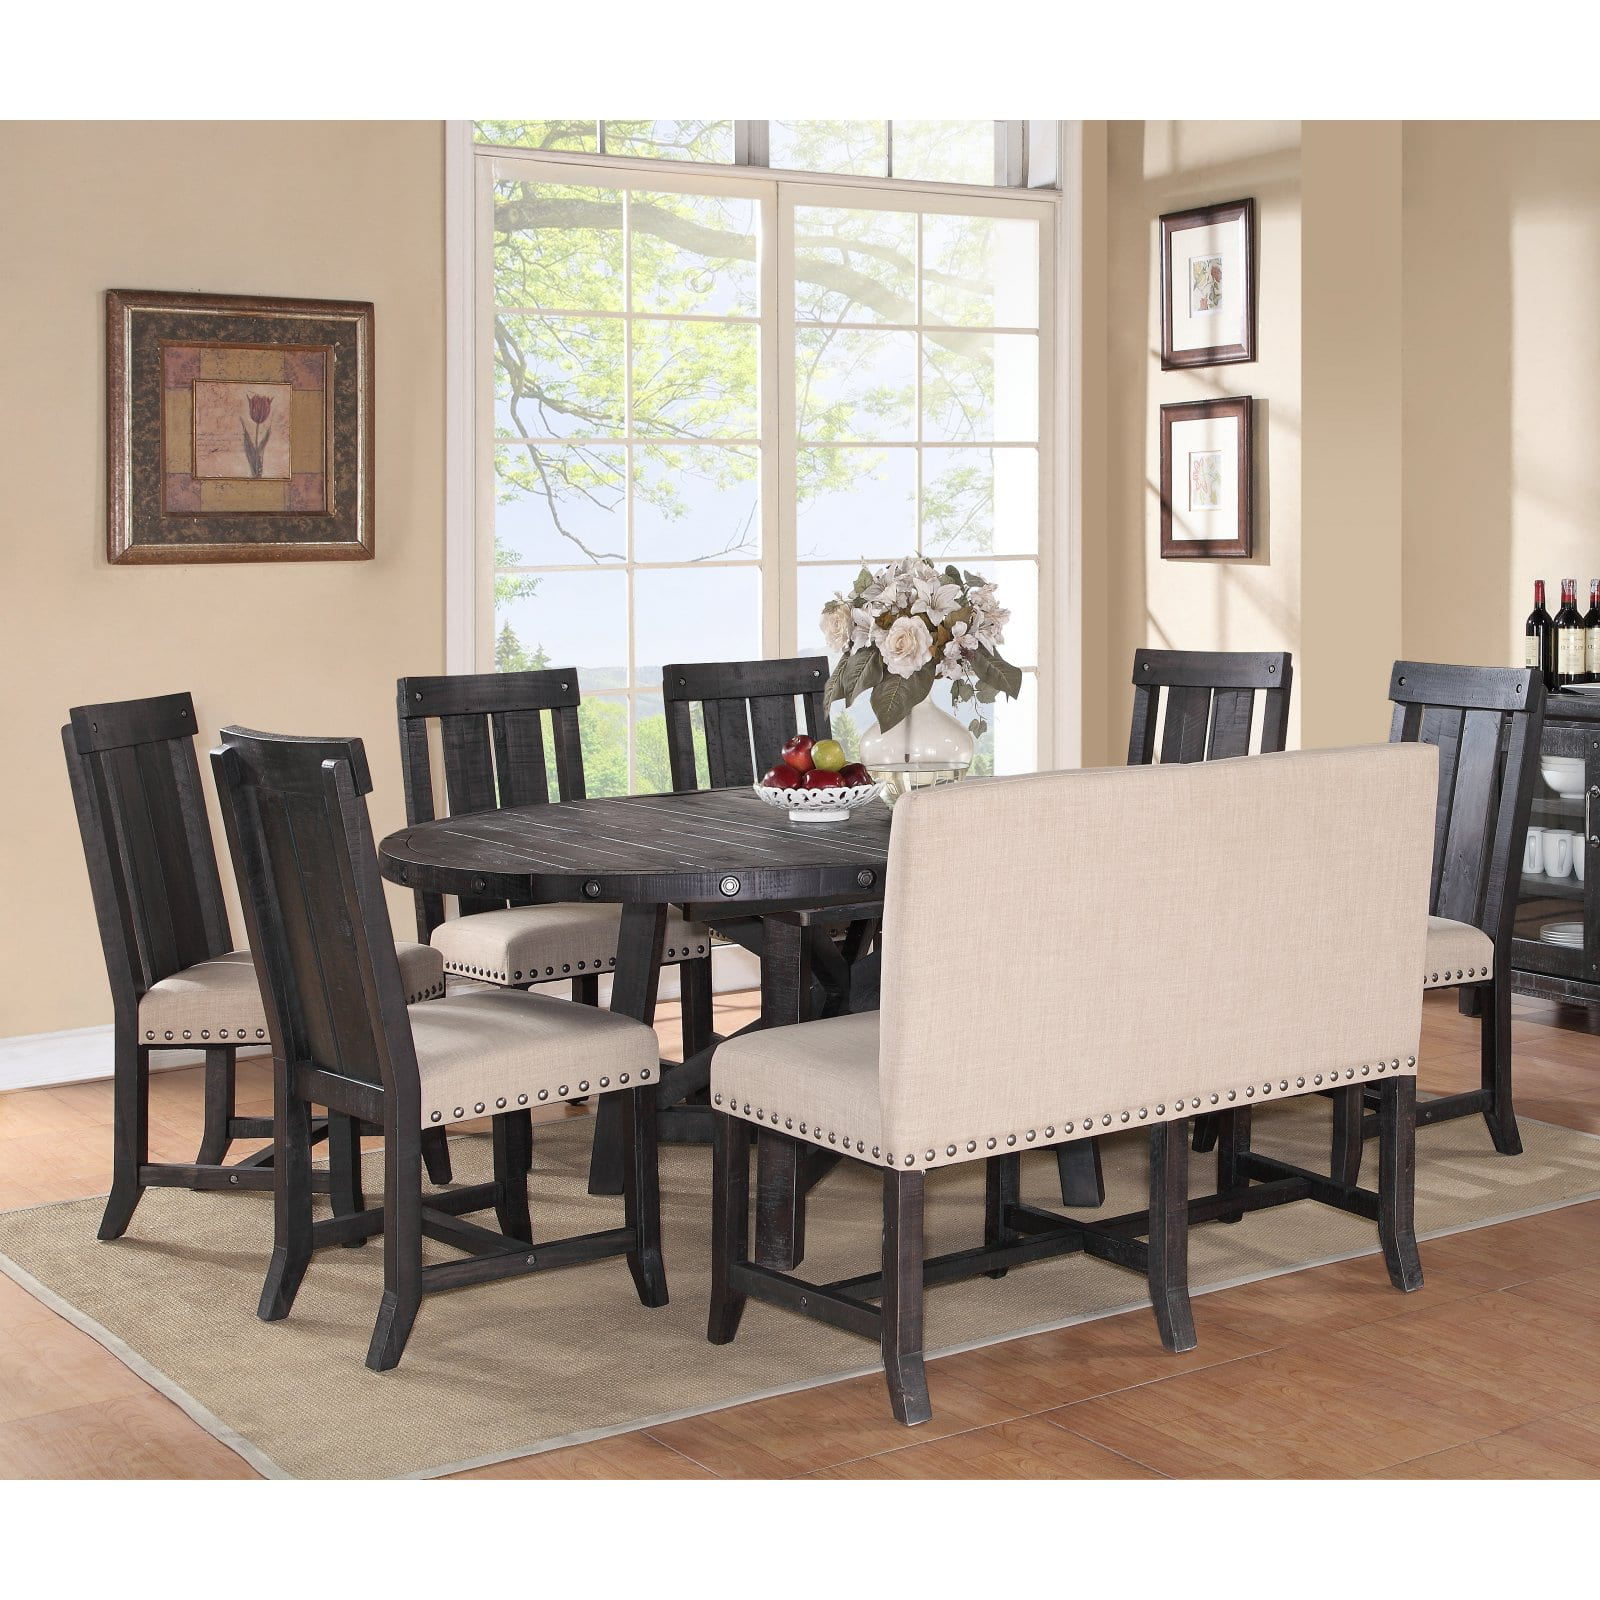 8 Piece Oval Dining Table Set, Dining Room Settee